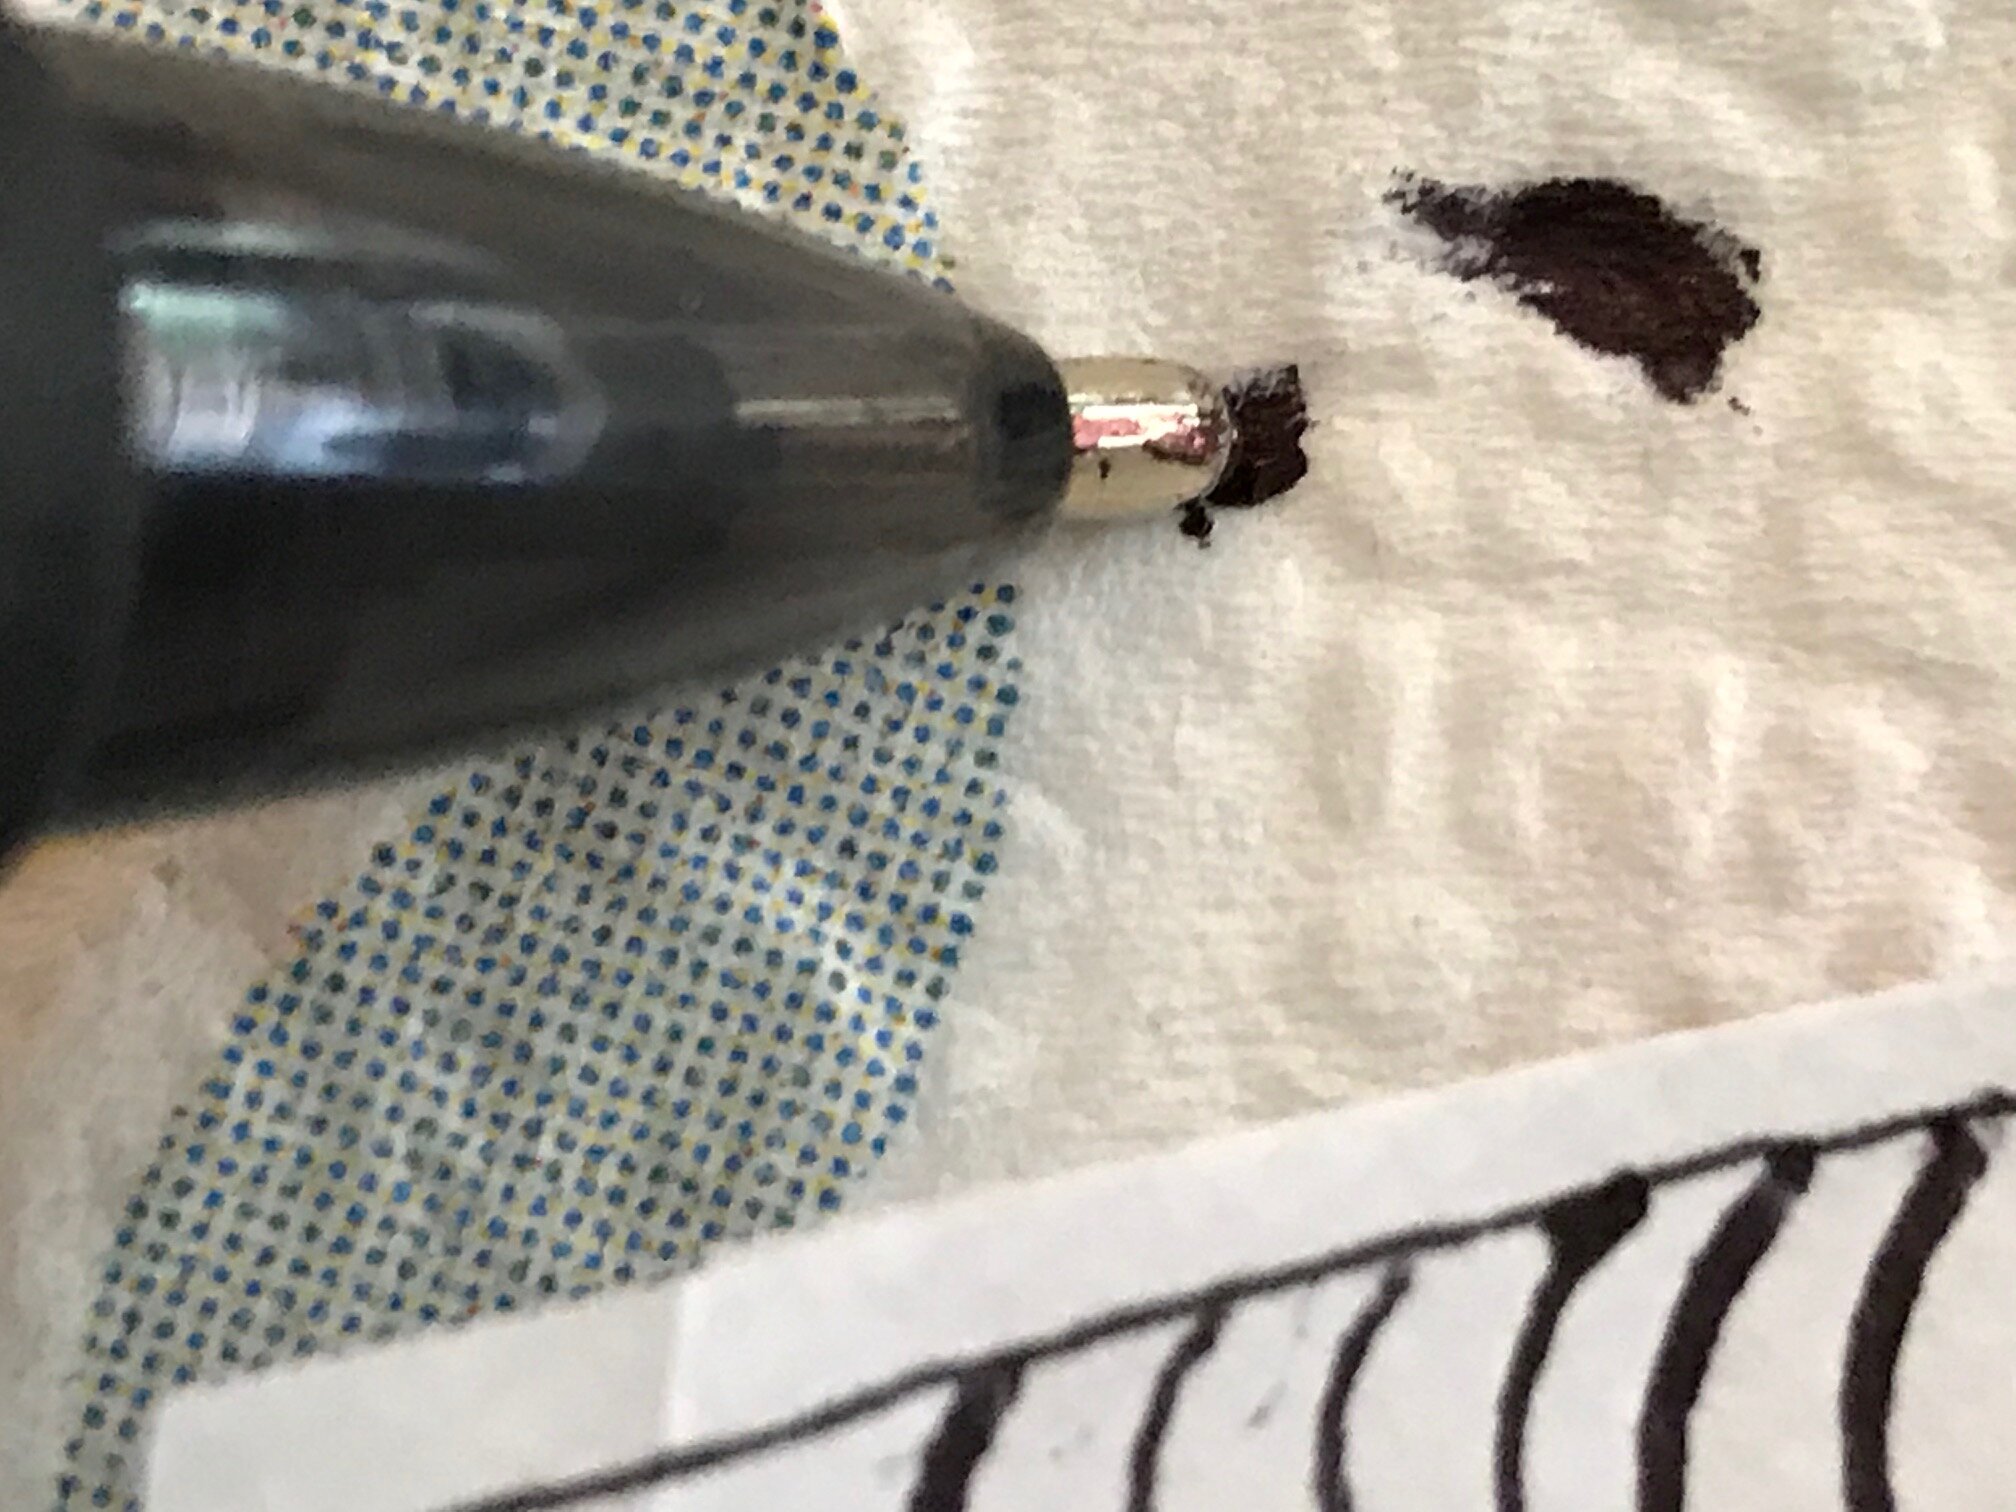  As the ink accumulates on the ball of the pen, you may need to roll the tip on the napkin to clean it.  